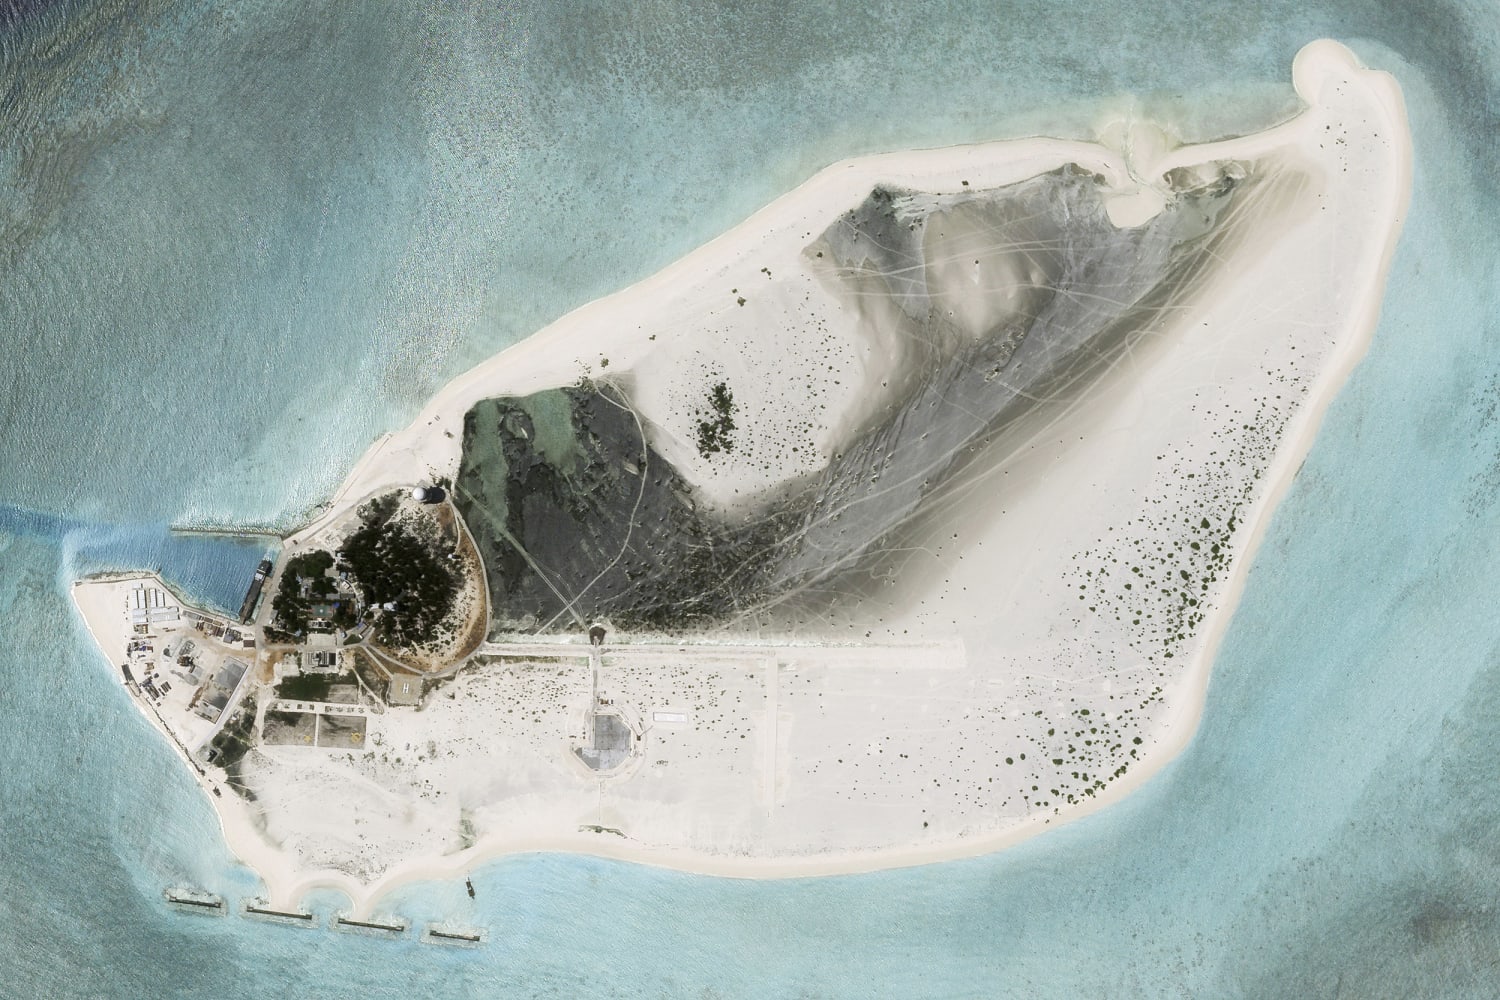 China appears to be building an airstrip on a disputed island in the South China Sea